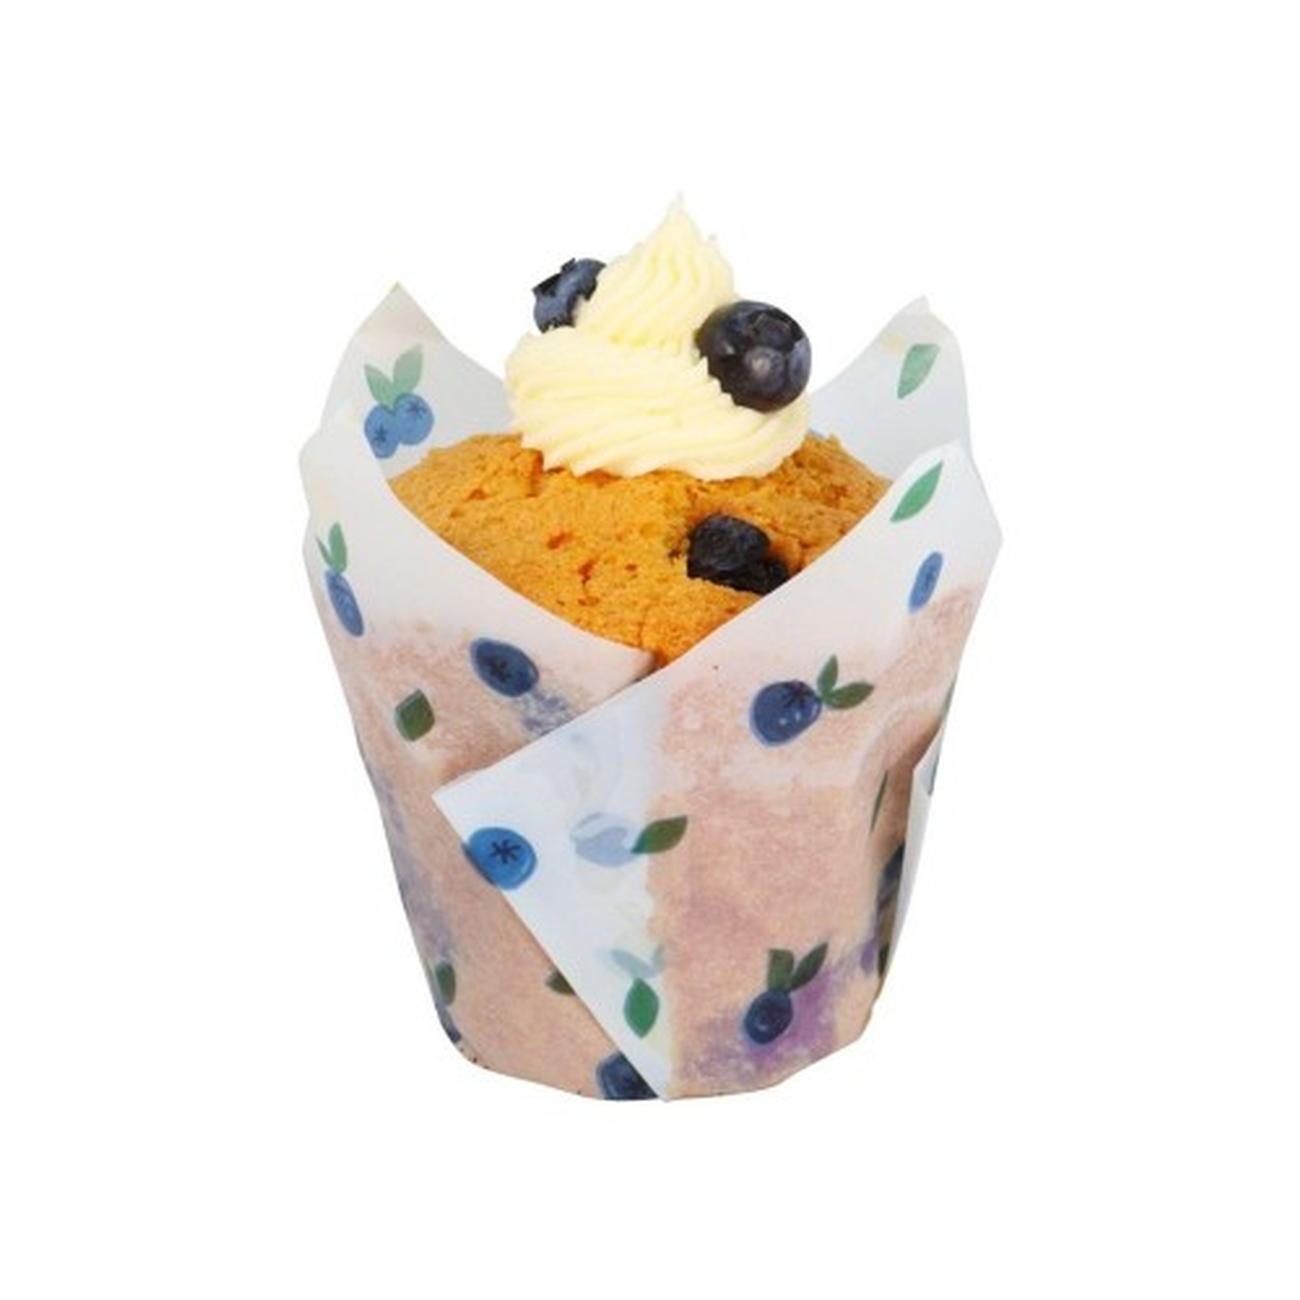 pme-24-blueberry-tulip-muffin-cases - PME 24 Blueberry Tulip Muffin Cases